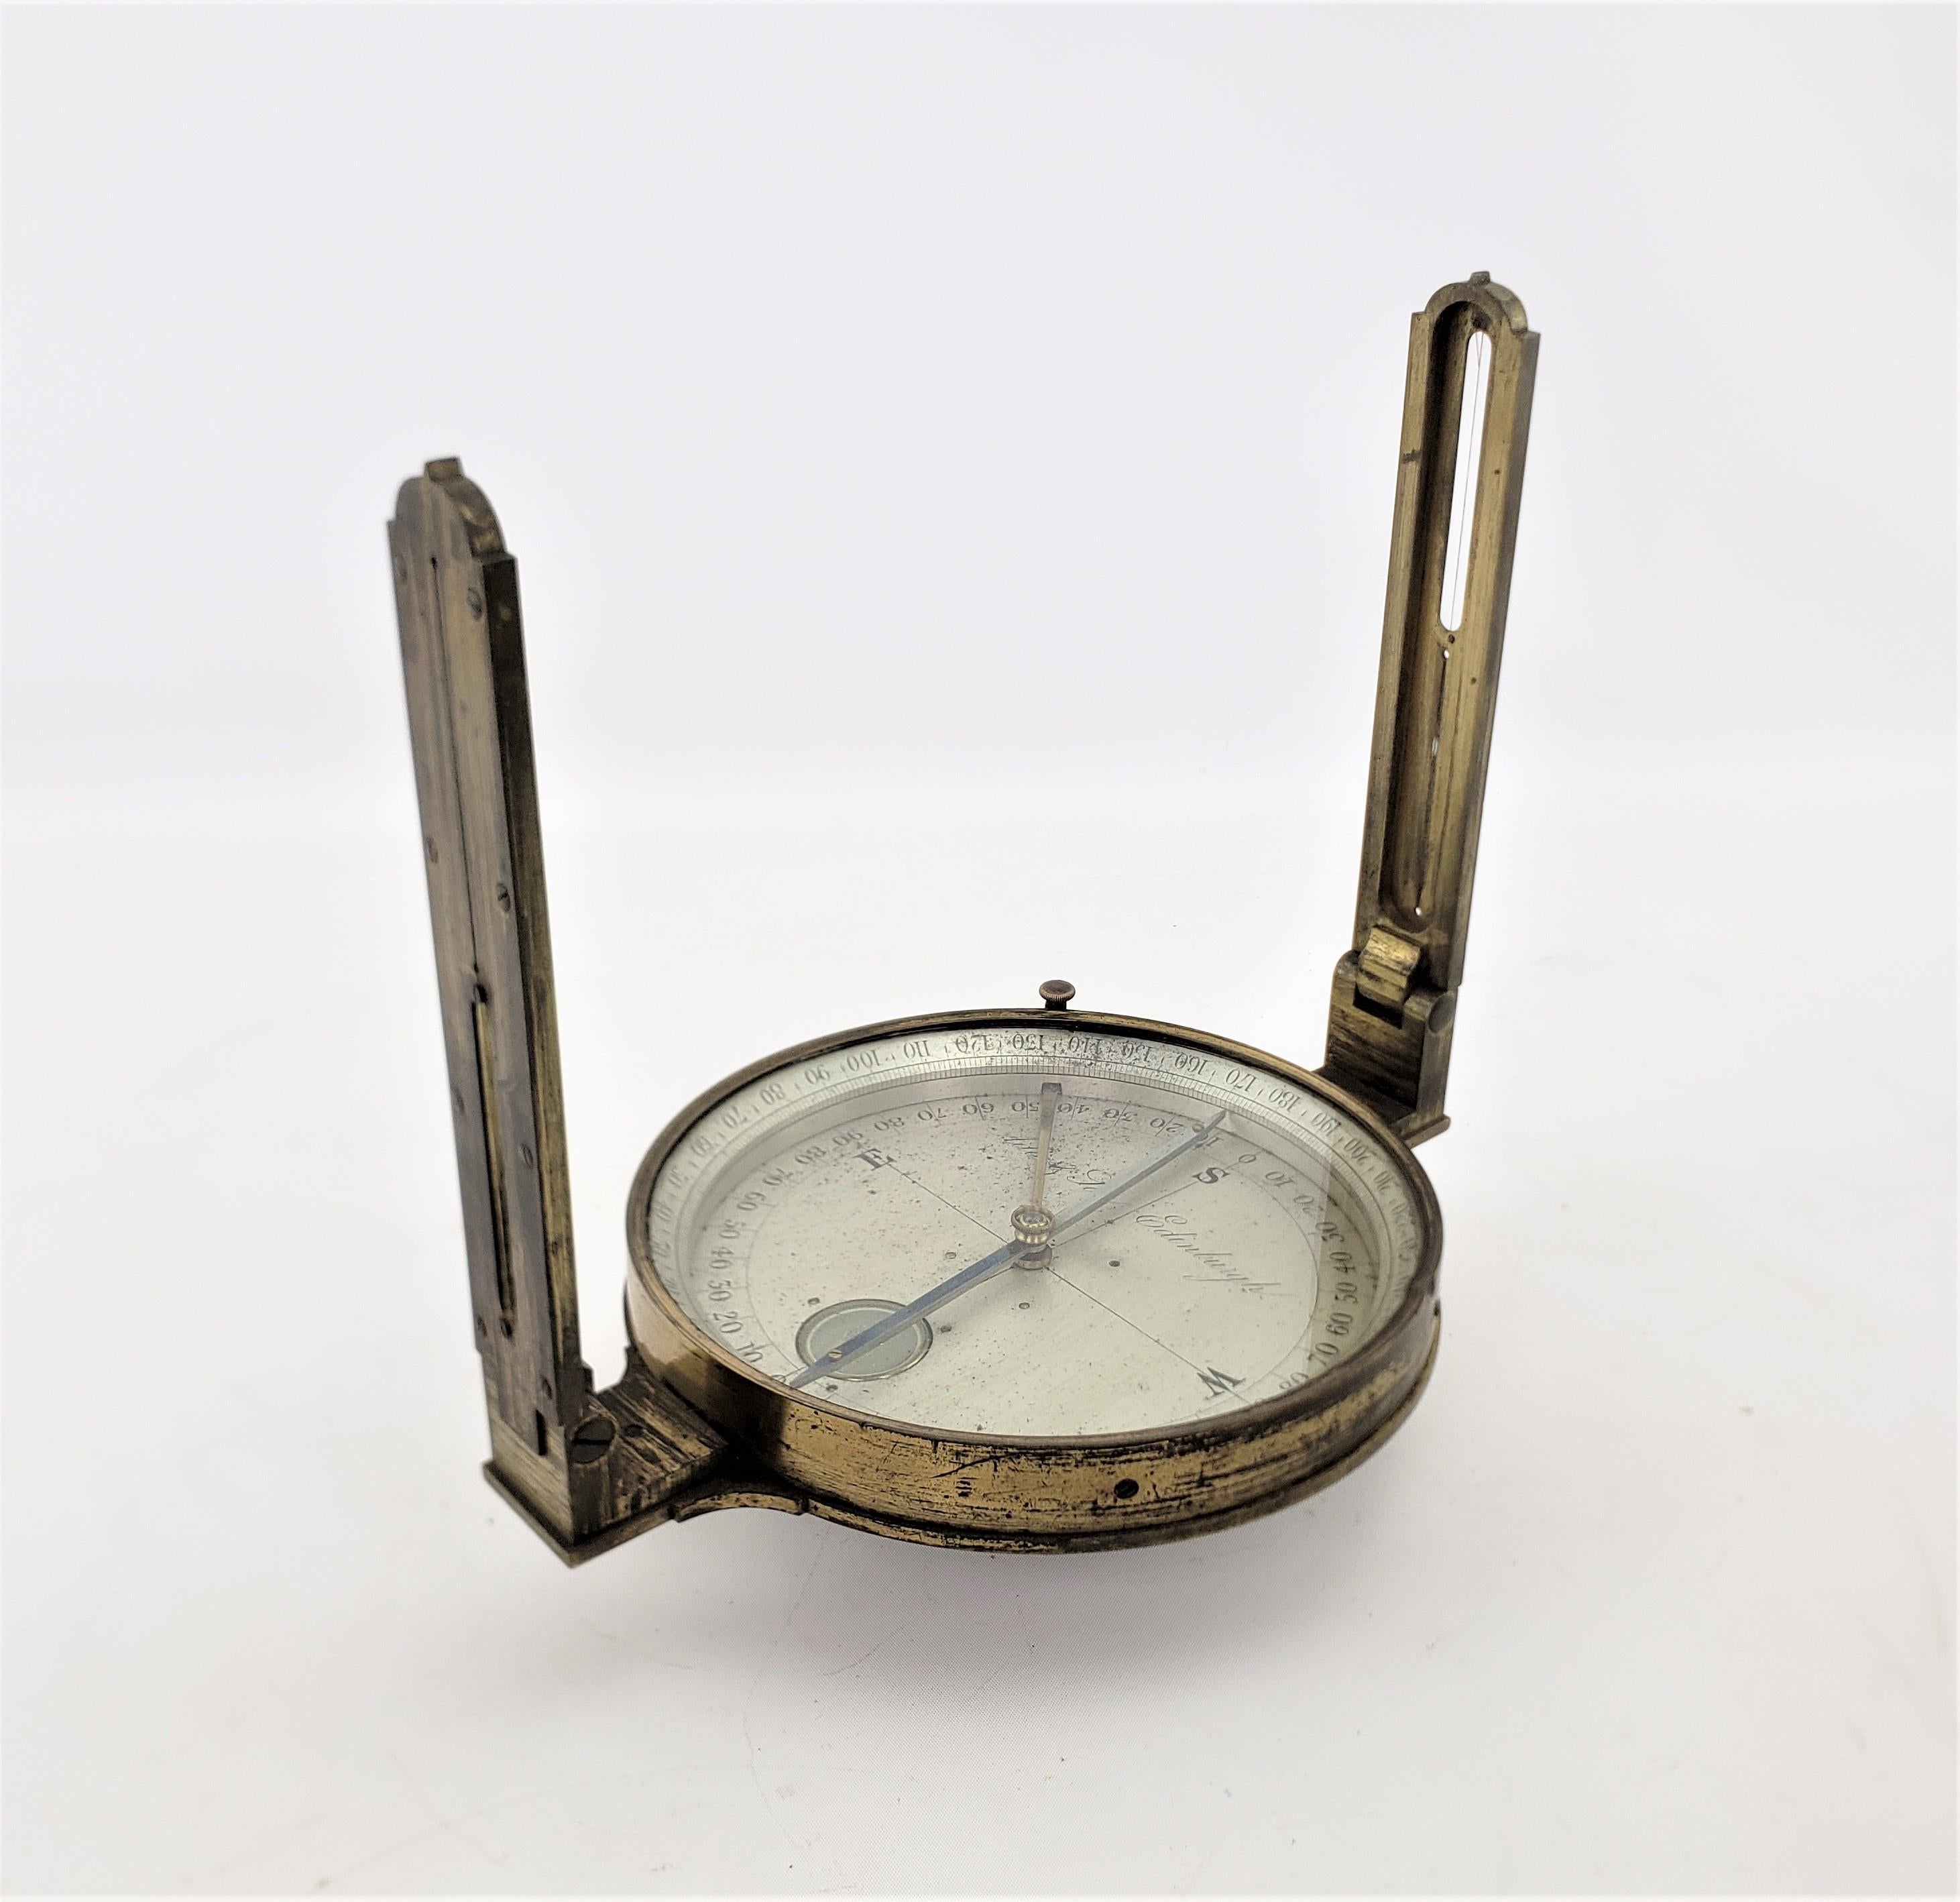 Antique Brass Scottish Surveyor's Compass in Fitted Wooden Box In Good Condition For Sale In Hamilton, Ontario